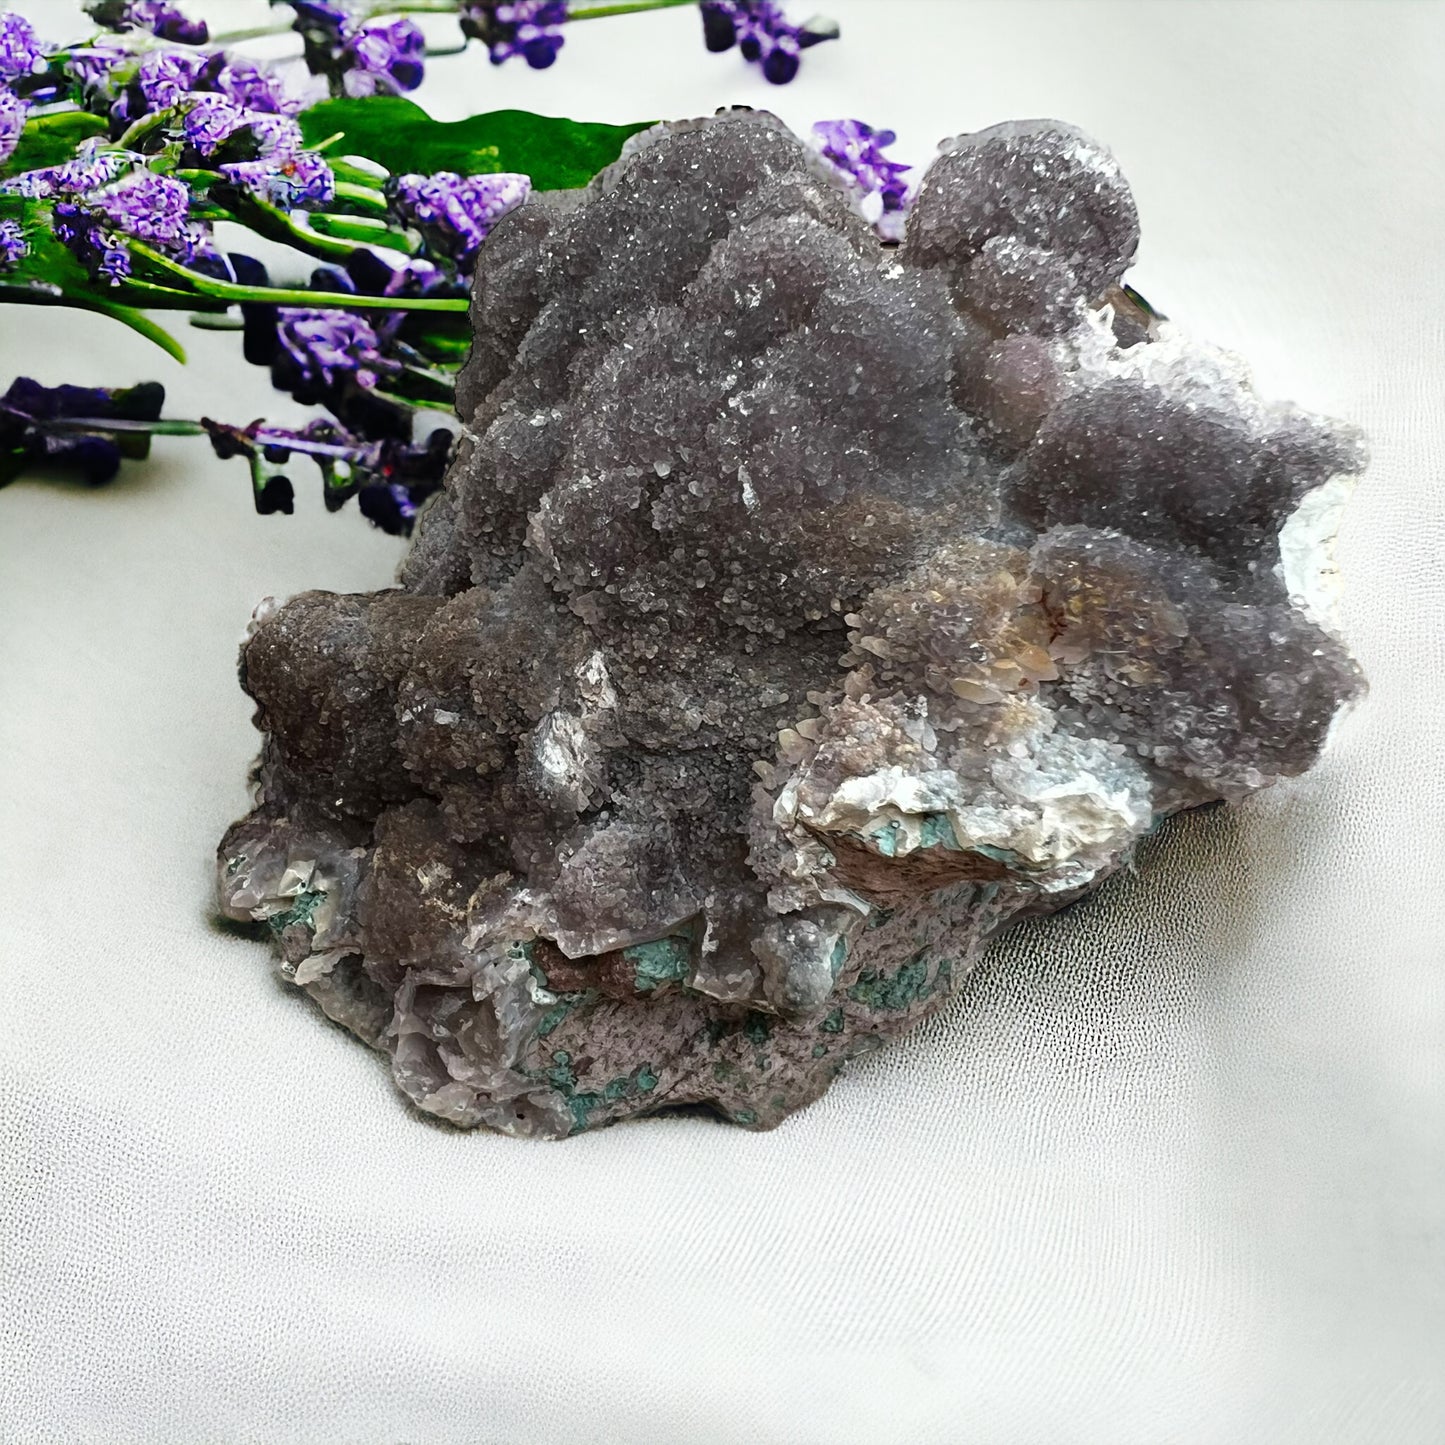 Amethyst Flower Plate with Amazing Large Stalactite Growth (L)